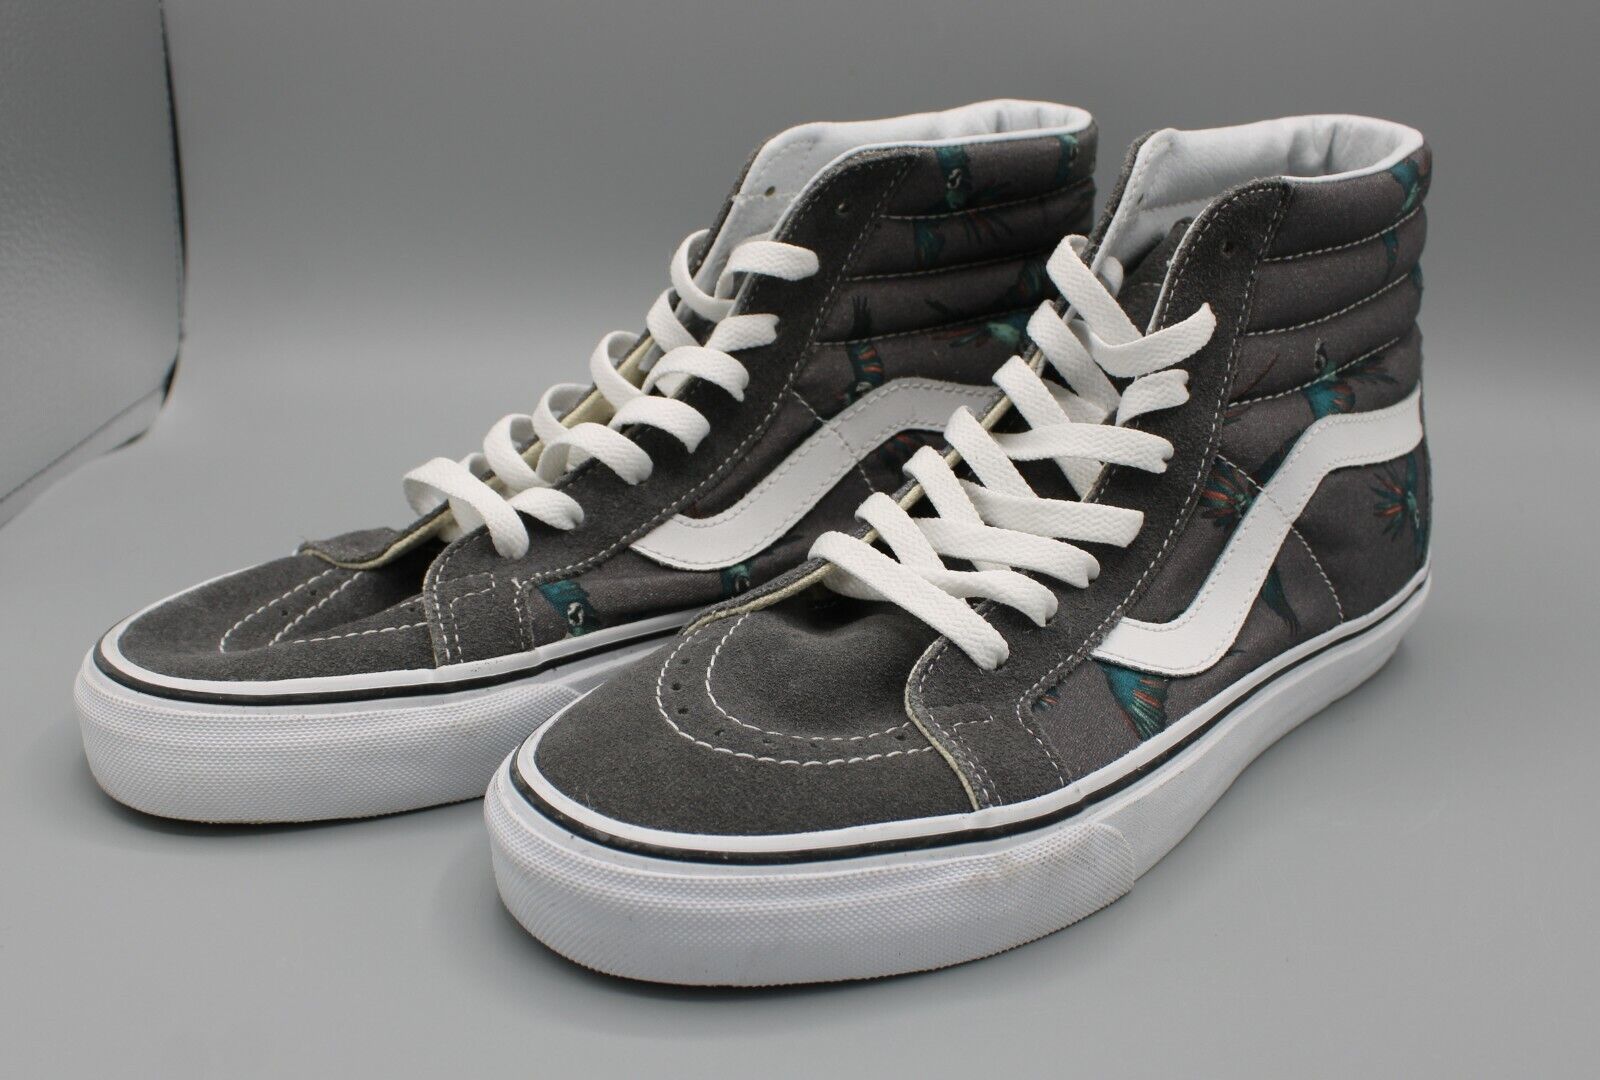 Vans Off The Wall Sk8-Hi Reissue Dirty Bird Pewter White US Mens 9.0 Read